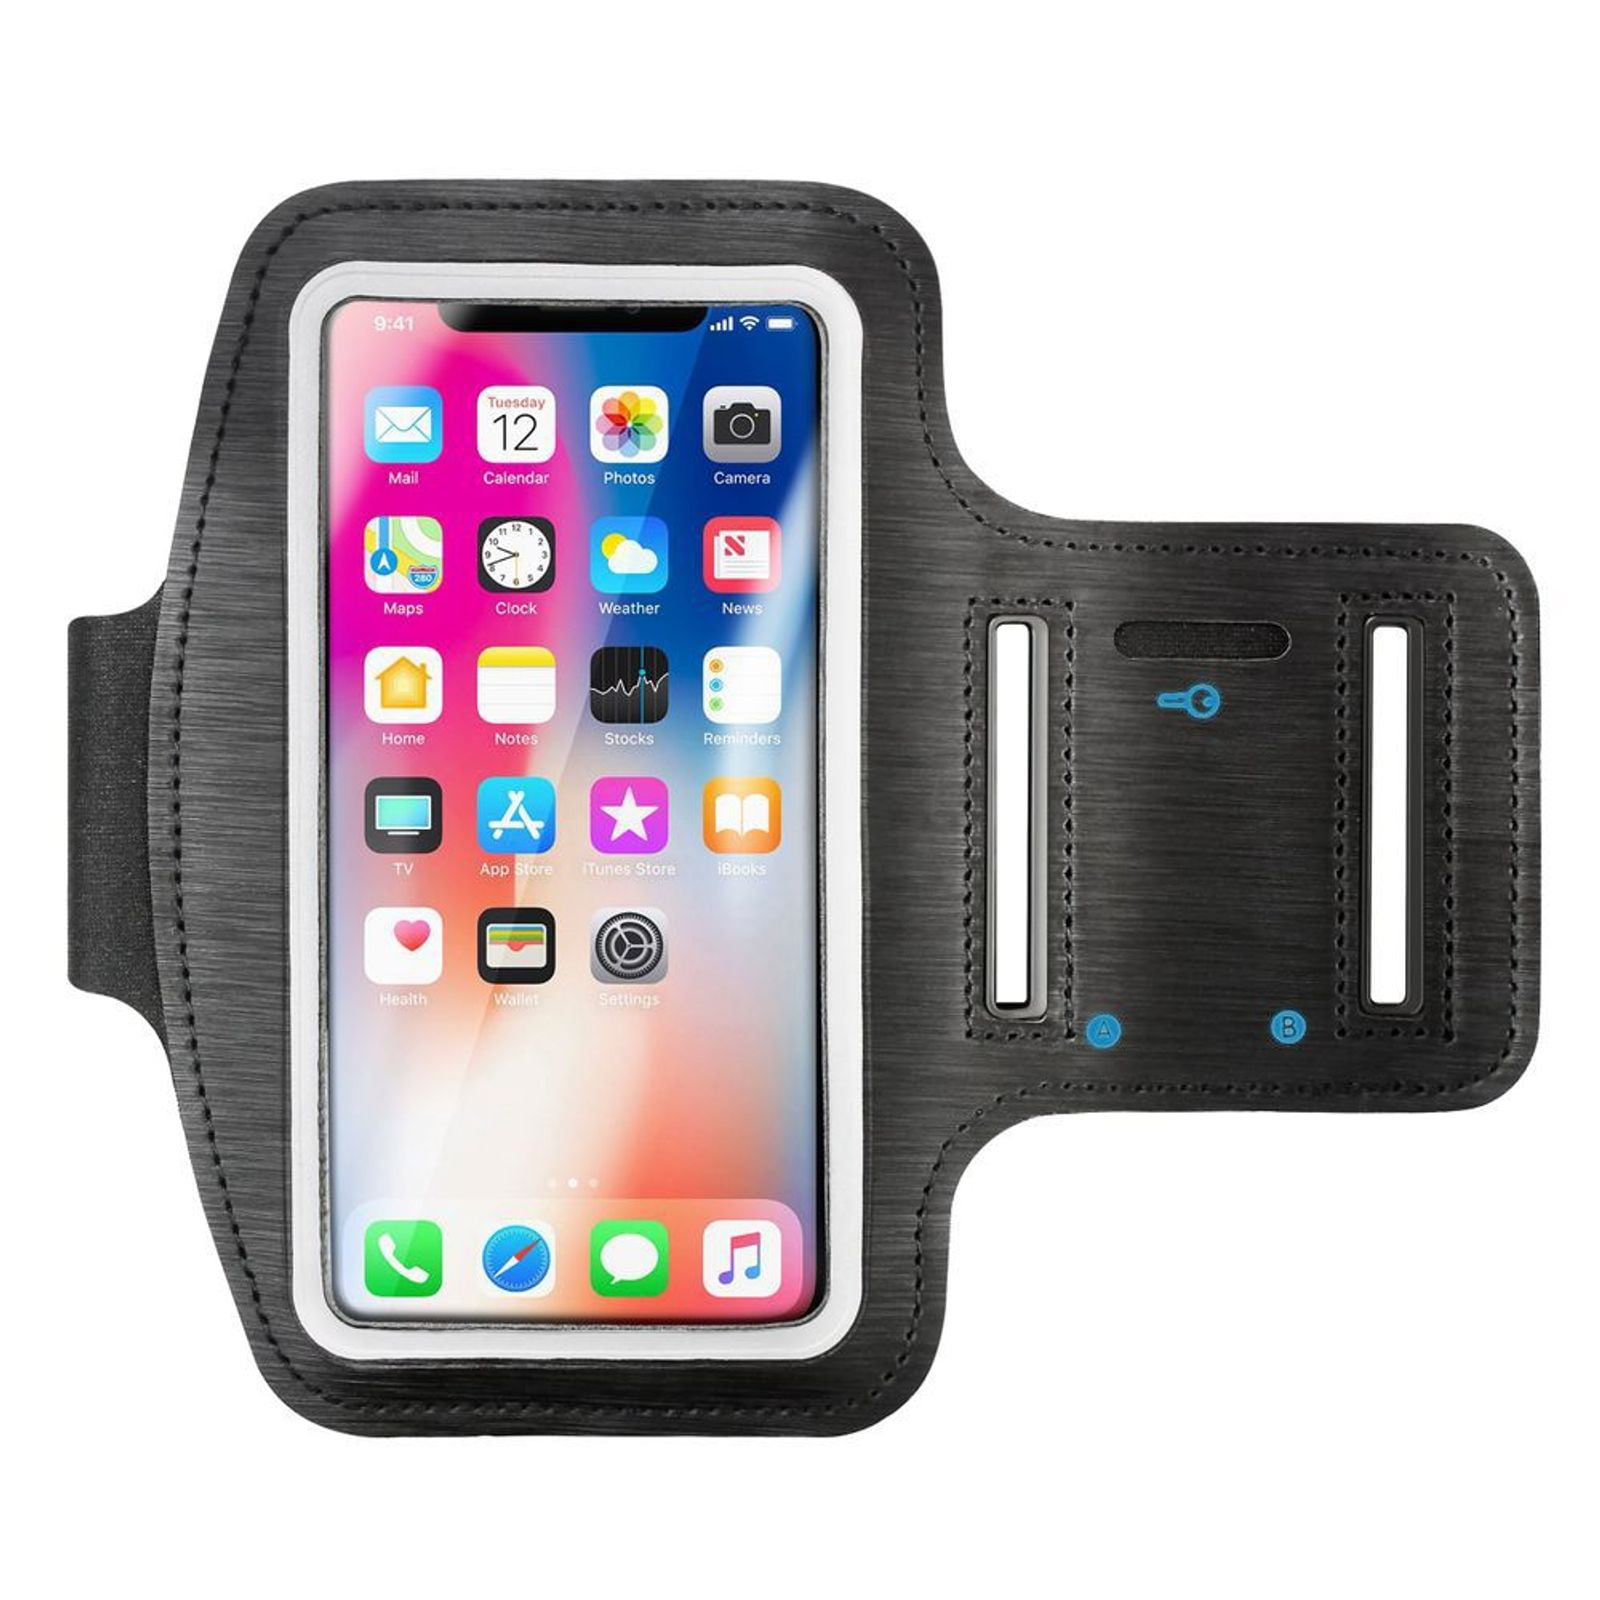 Quality Sports Armband Gym Running Workout Phone Case✔Samsung Galaxy S7 Edge